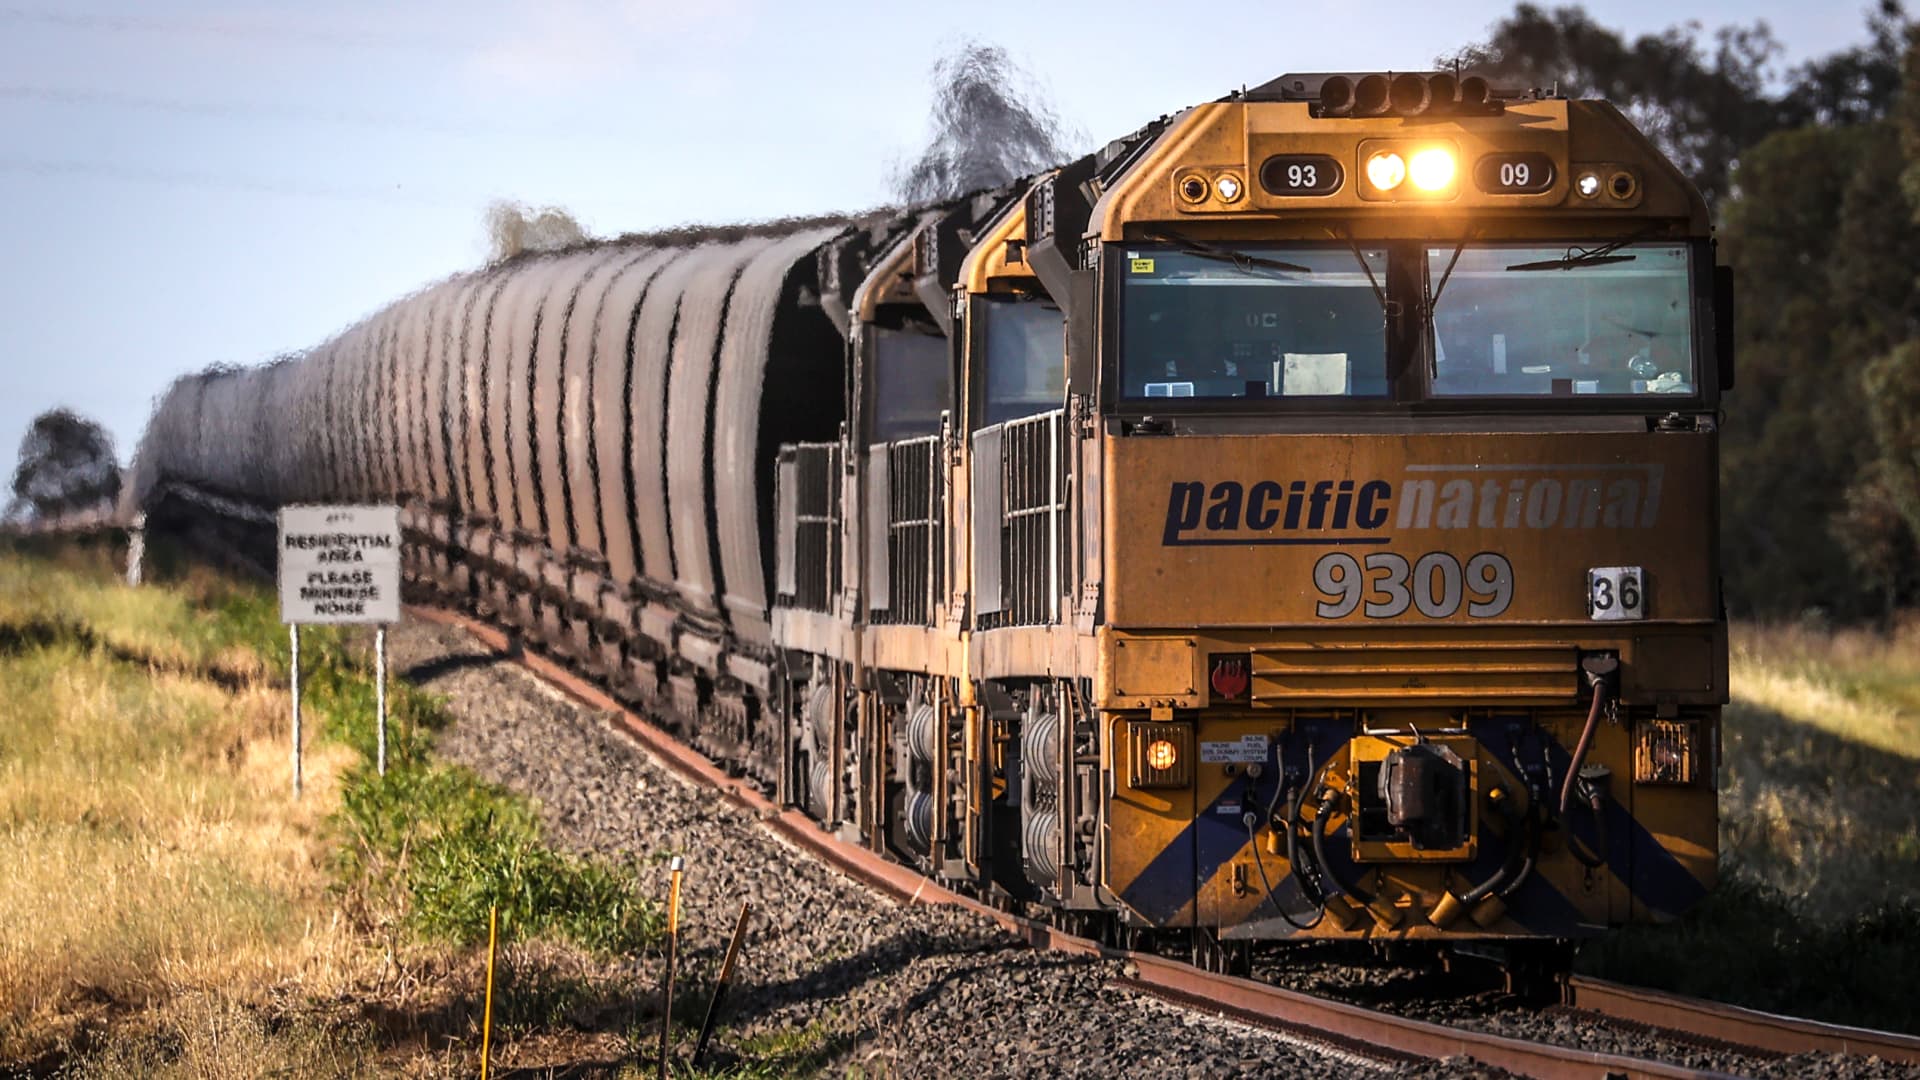 A freight train transports coal from the Gunnedah Coal Handling and Prepararation Plant, operated by Whitehaven Coal Ltd., in Gunnedah, New South Wales, Australia, on Tuesday, Oct. 13, 2020.